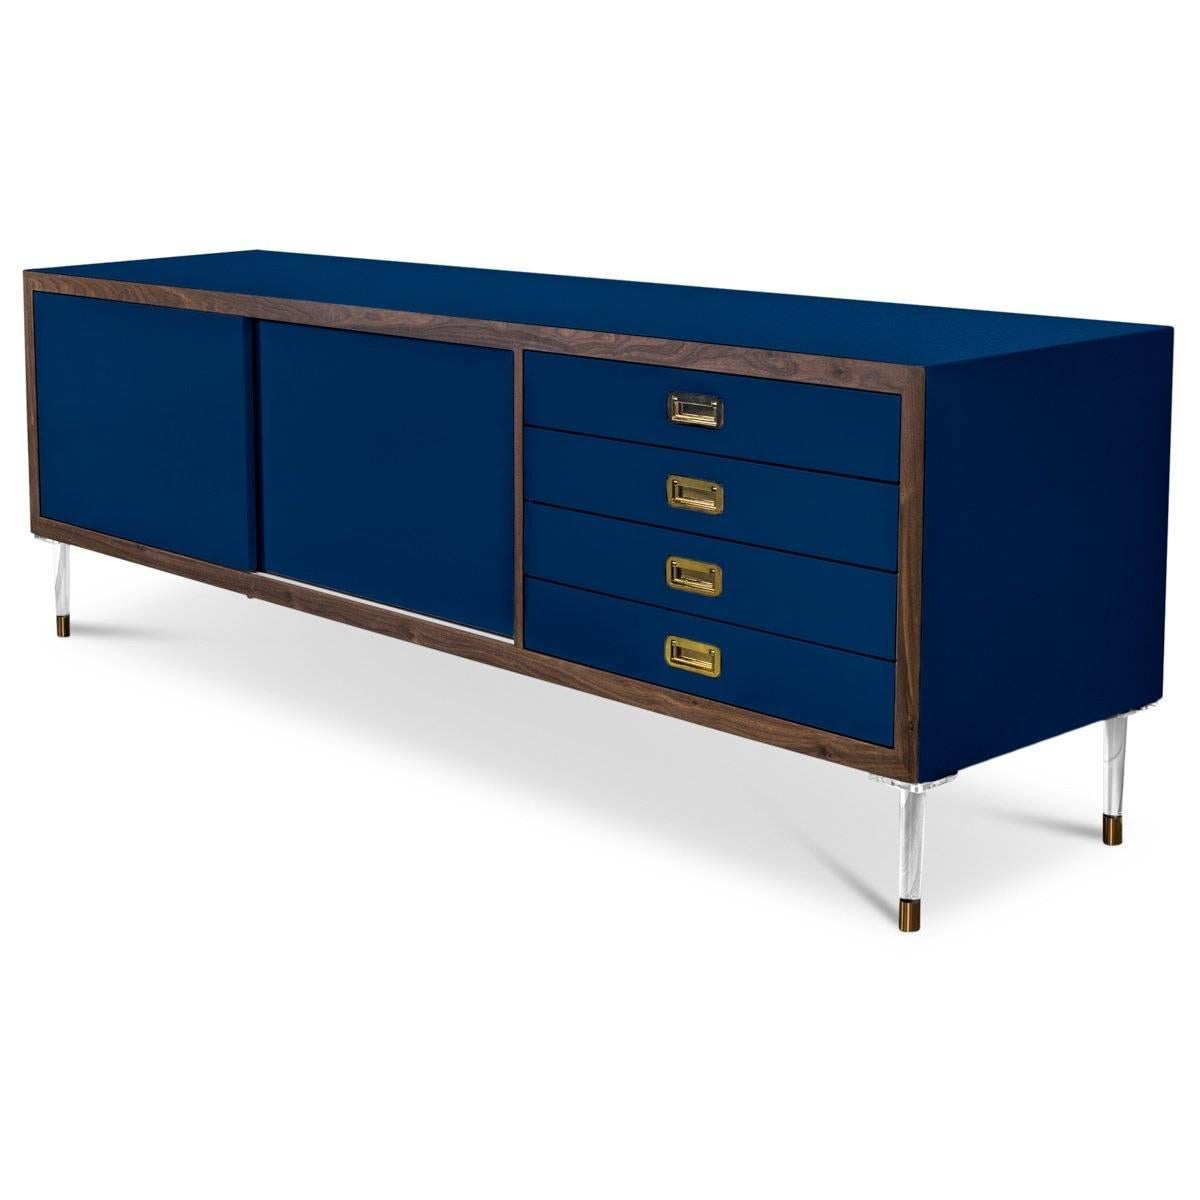 Introducing our new St. Martin credenza featuring two sliding doors and four drawers to maximize its functionality while still being stylish and chic. This retro-modern design features an oiled walnut trim, brass hardware, our famous Navy lacquer